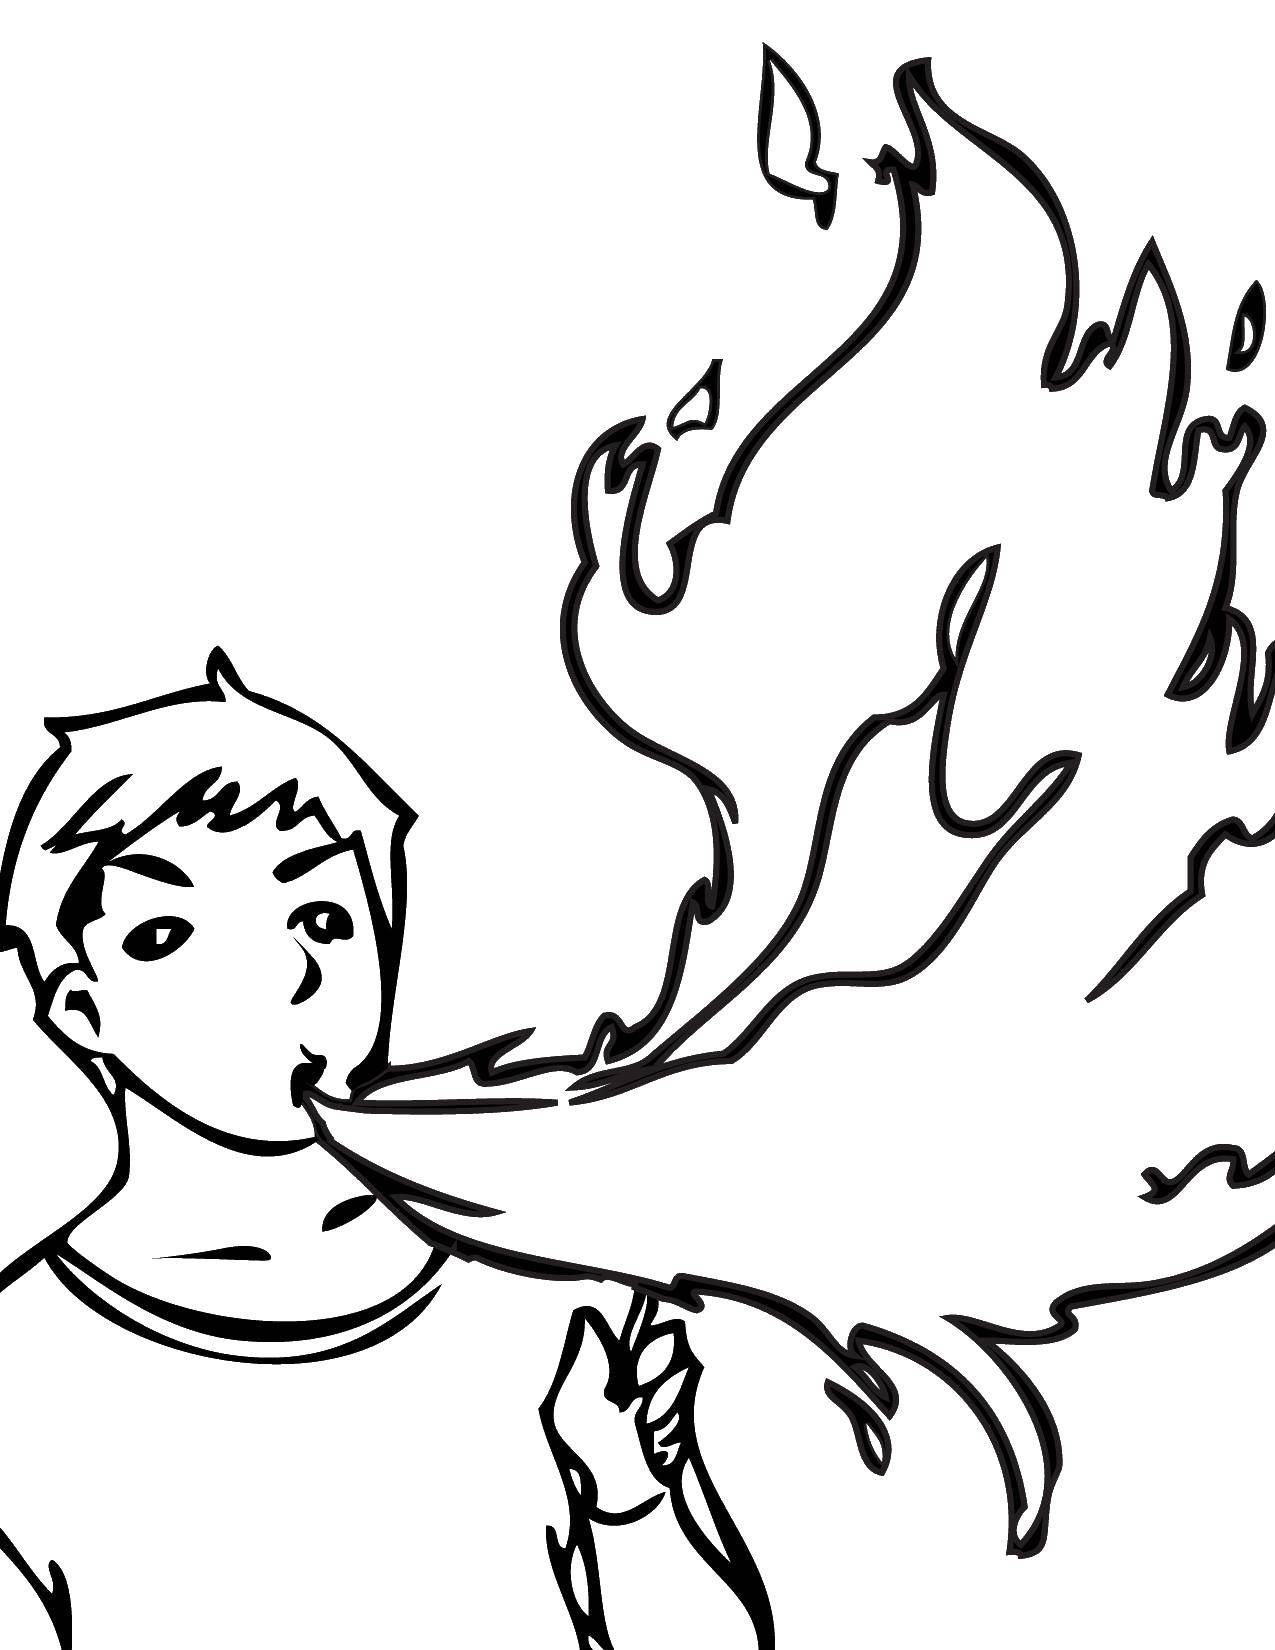 Coloring Fakir. Category Fire. Tags:  Fire, fire.